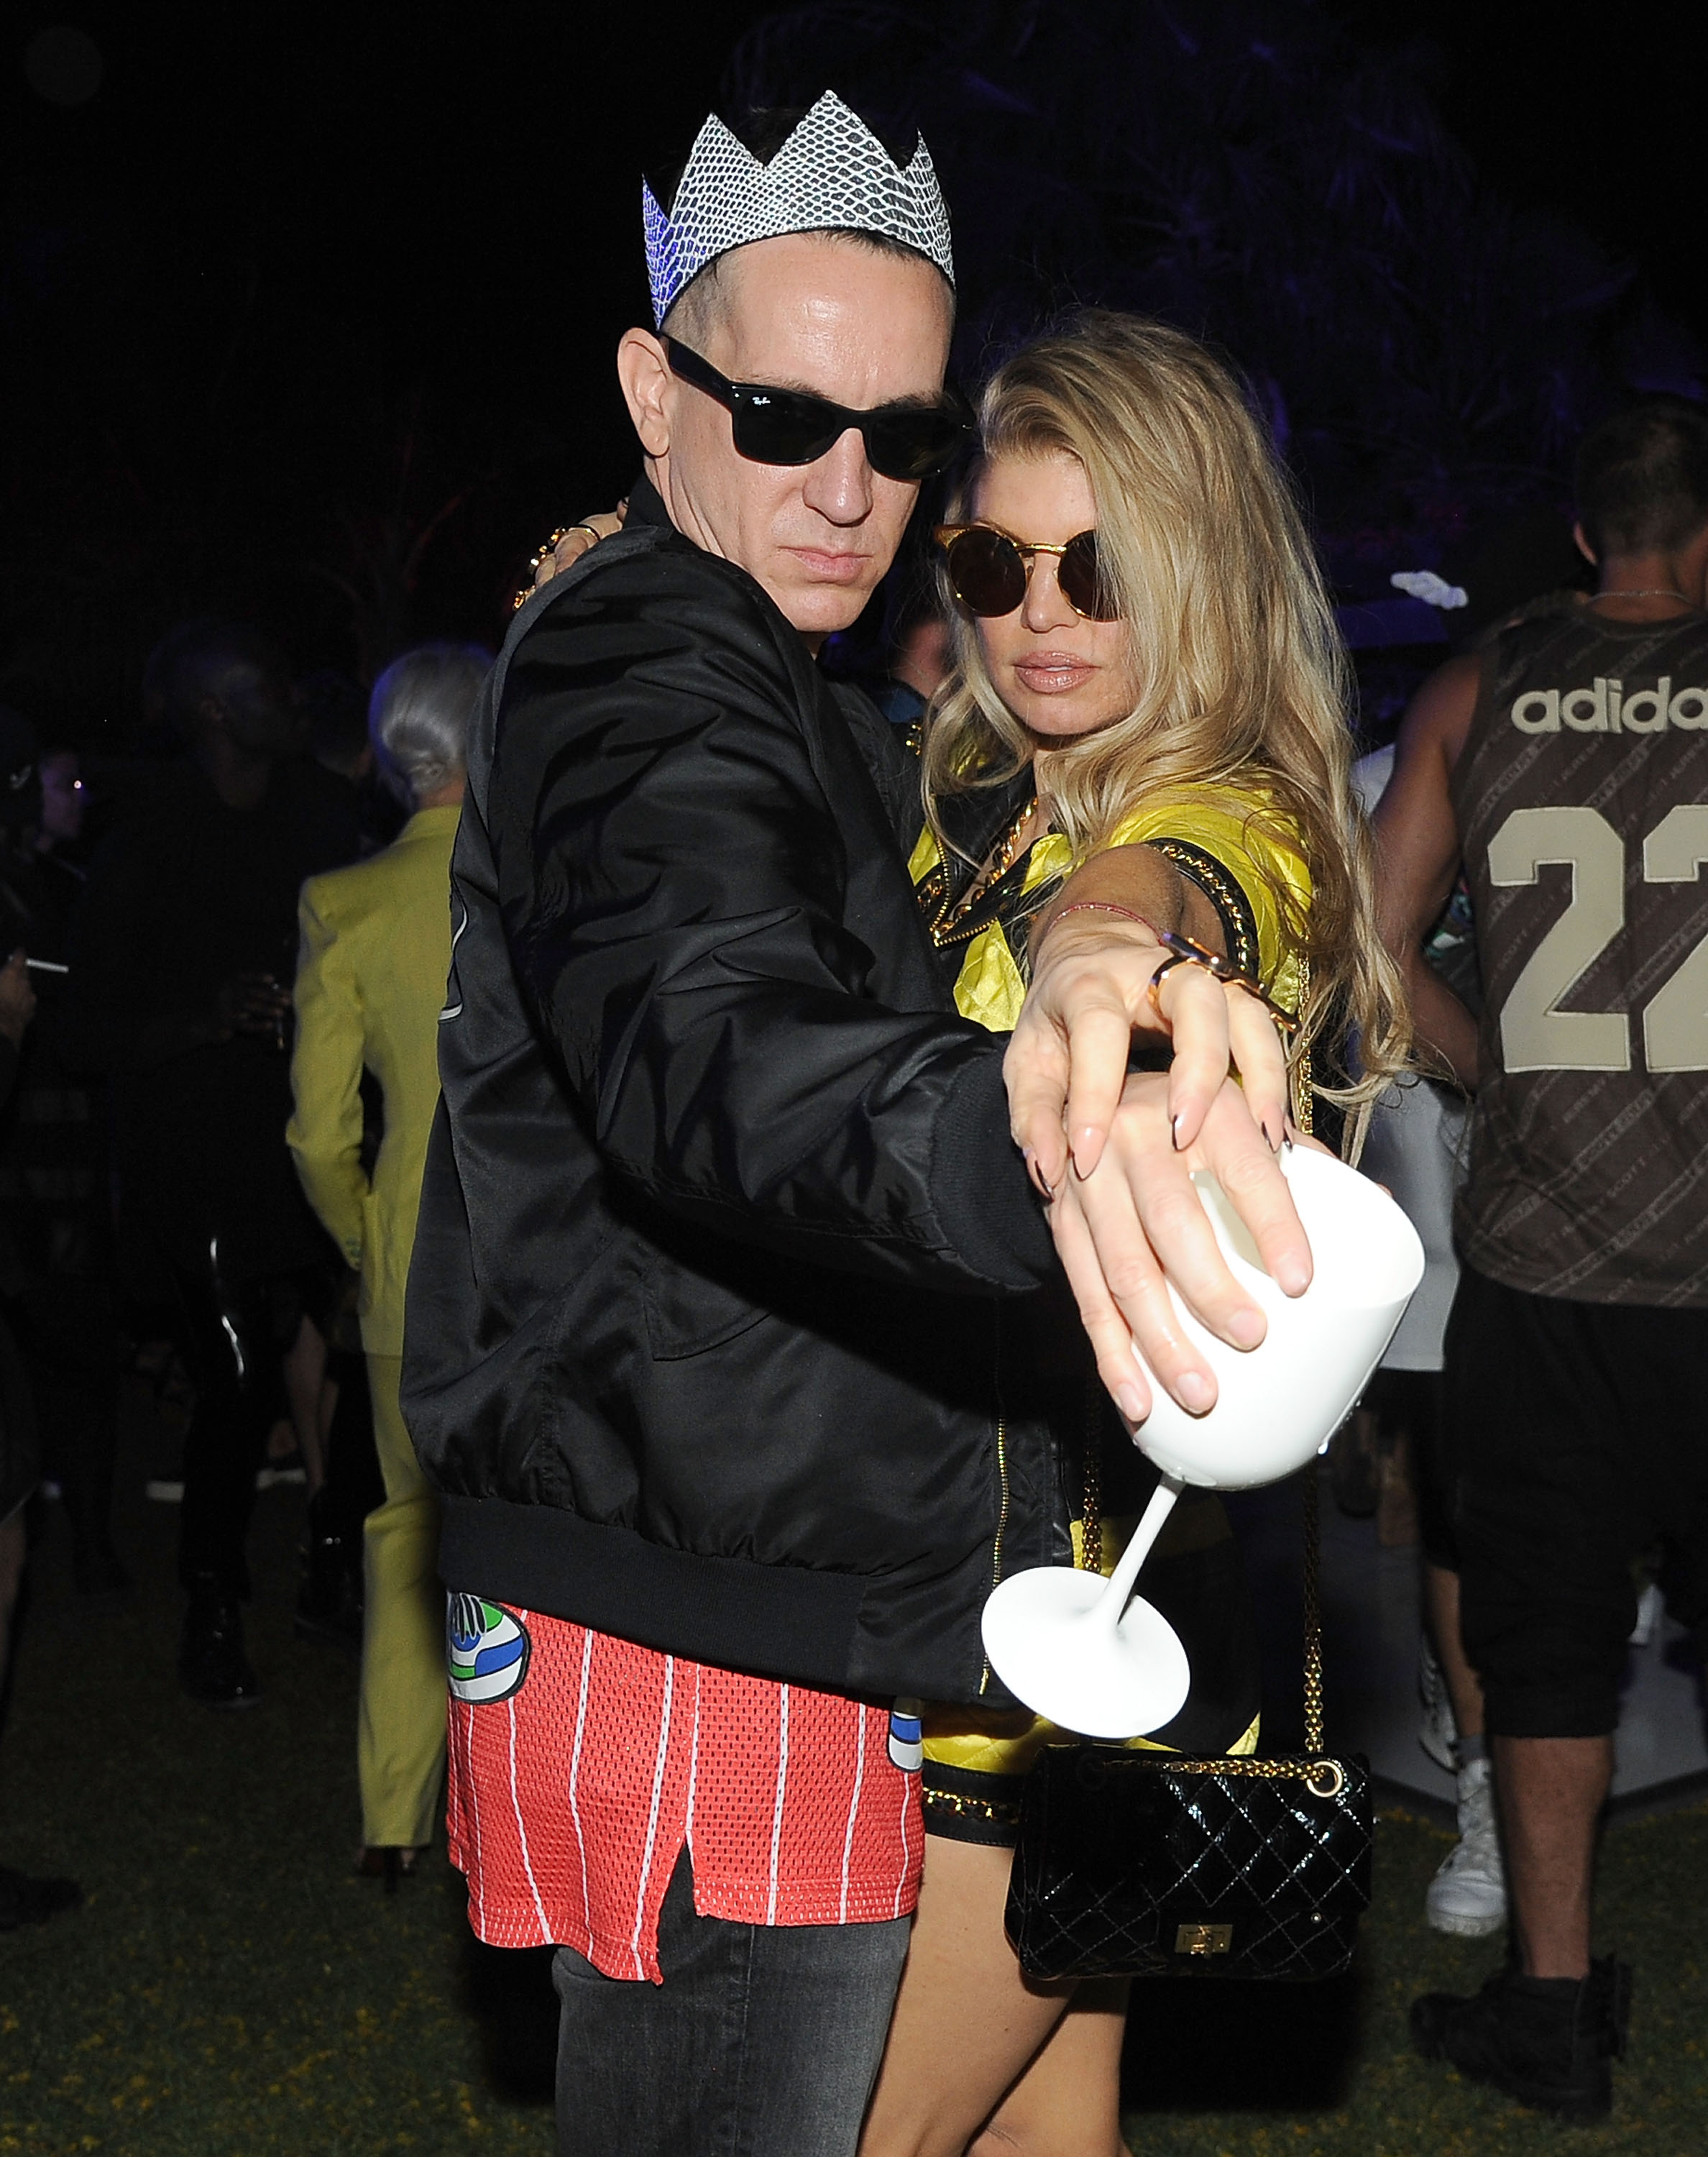 Fashion designer Jeremy Scott and singer Fergie enjoying Moet Ice Imperial at Moschino's Late Night hosted by Jeremy Scott at Coachella 2015